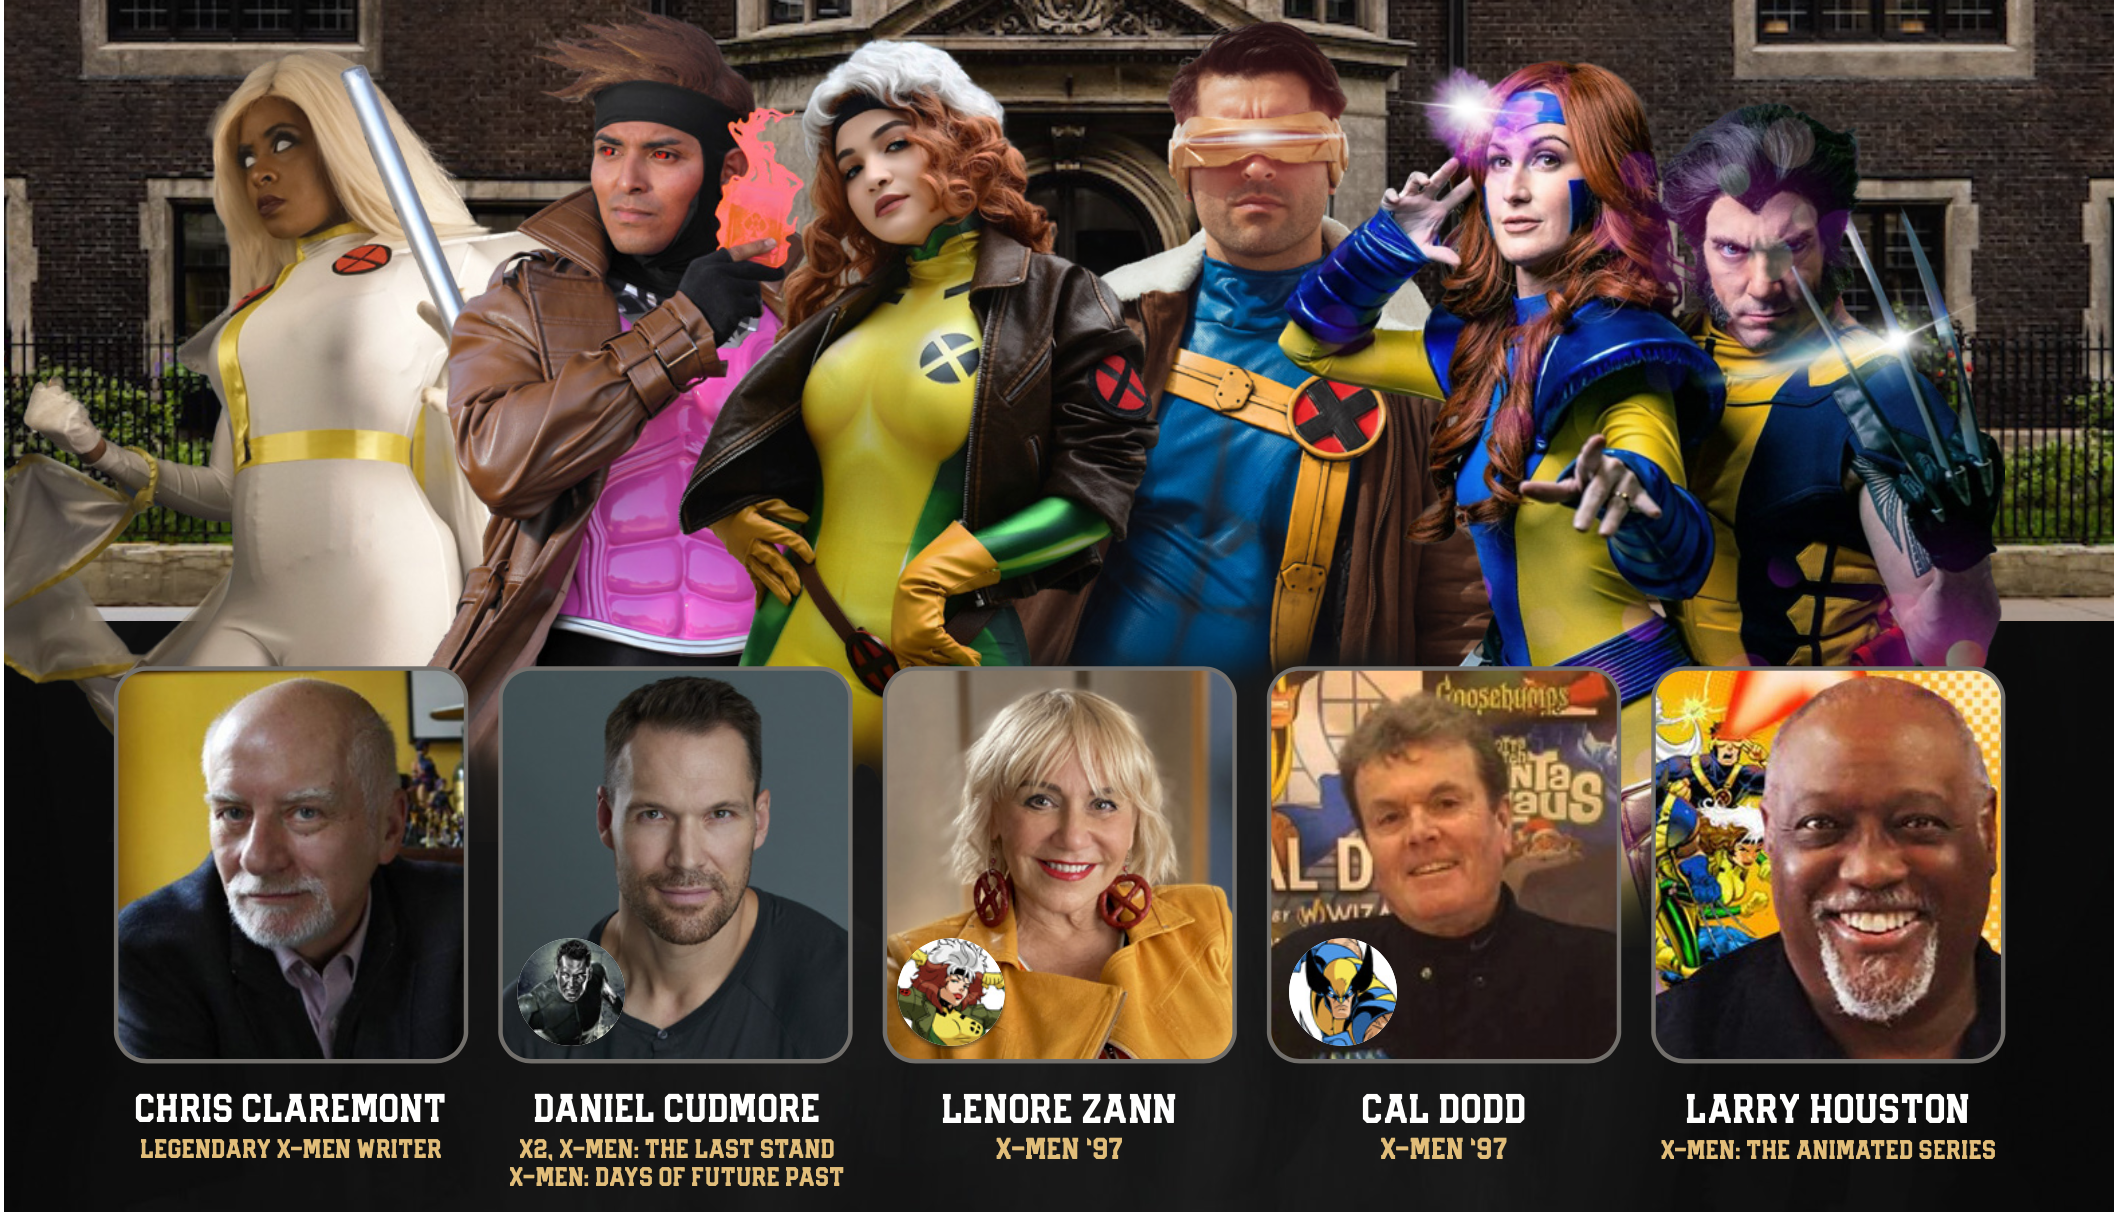 Uncanny Experience panels and classes announced